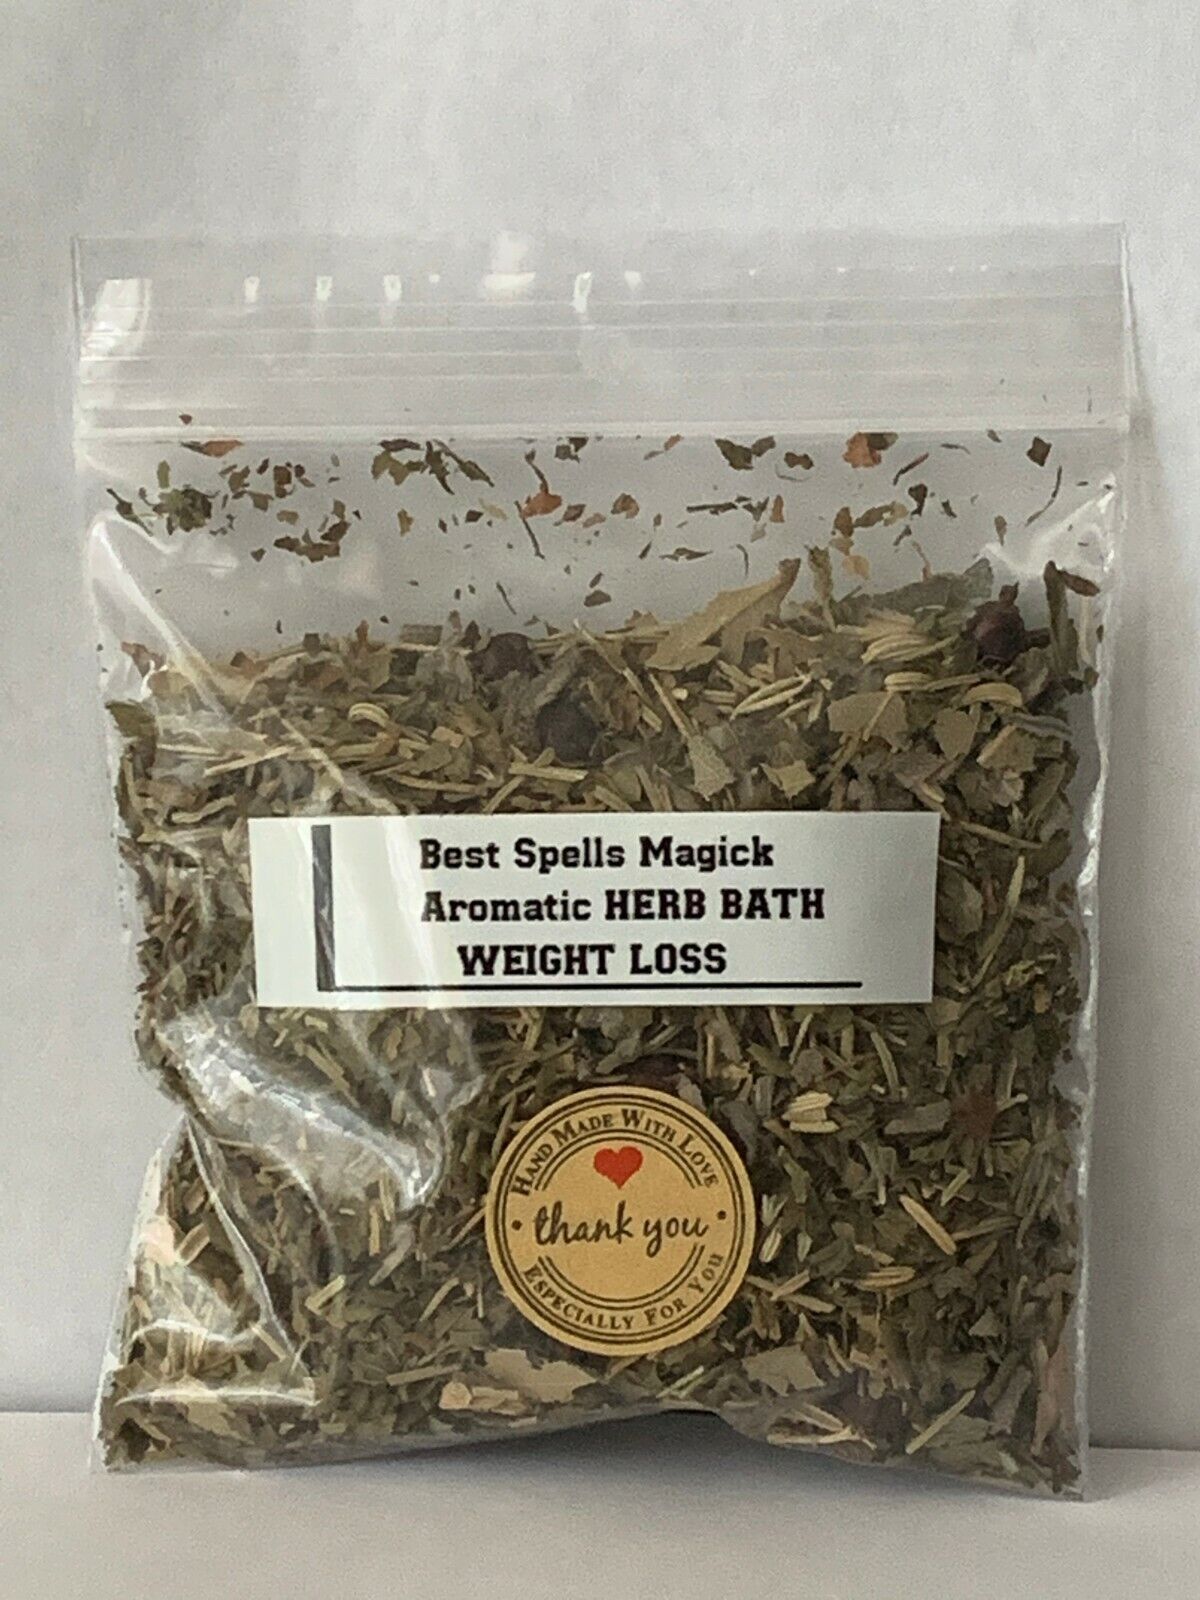 WEIGHT LOSS Spell & Aromatic Bath Herbal Blend by Best Spells Magick